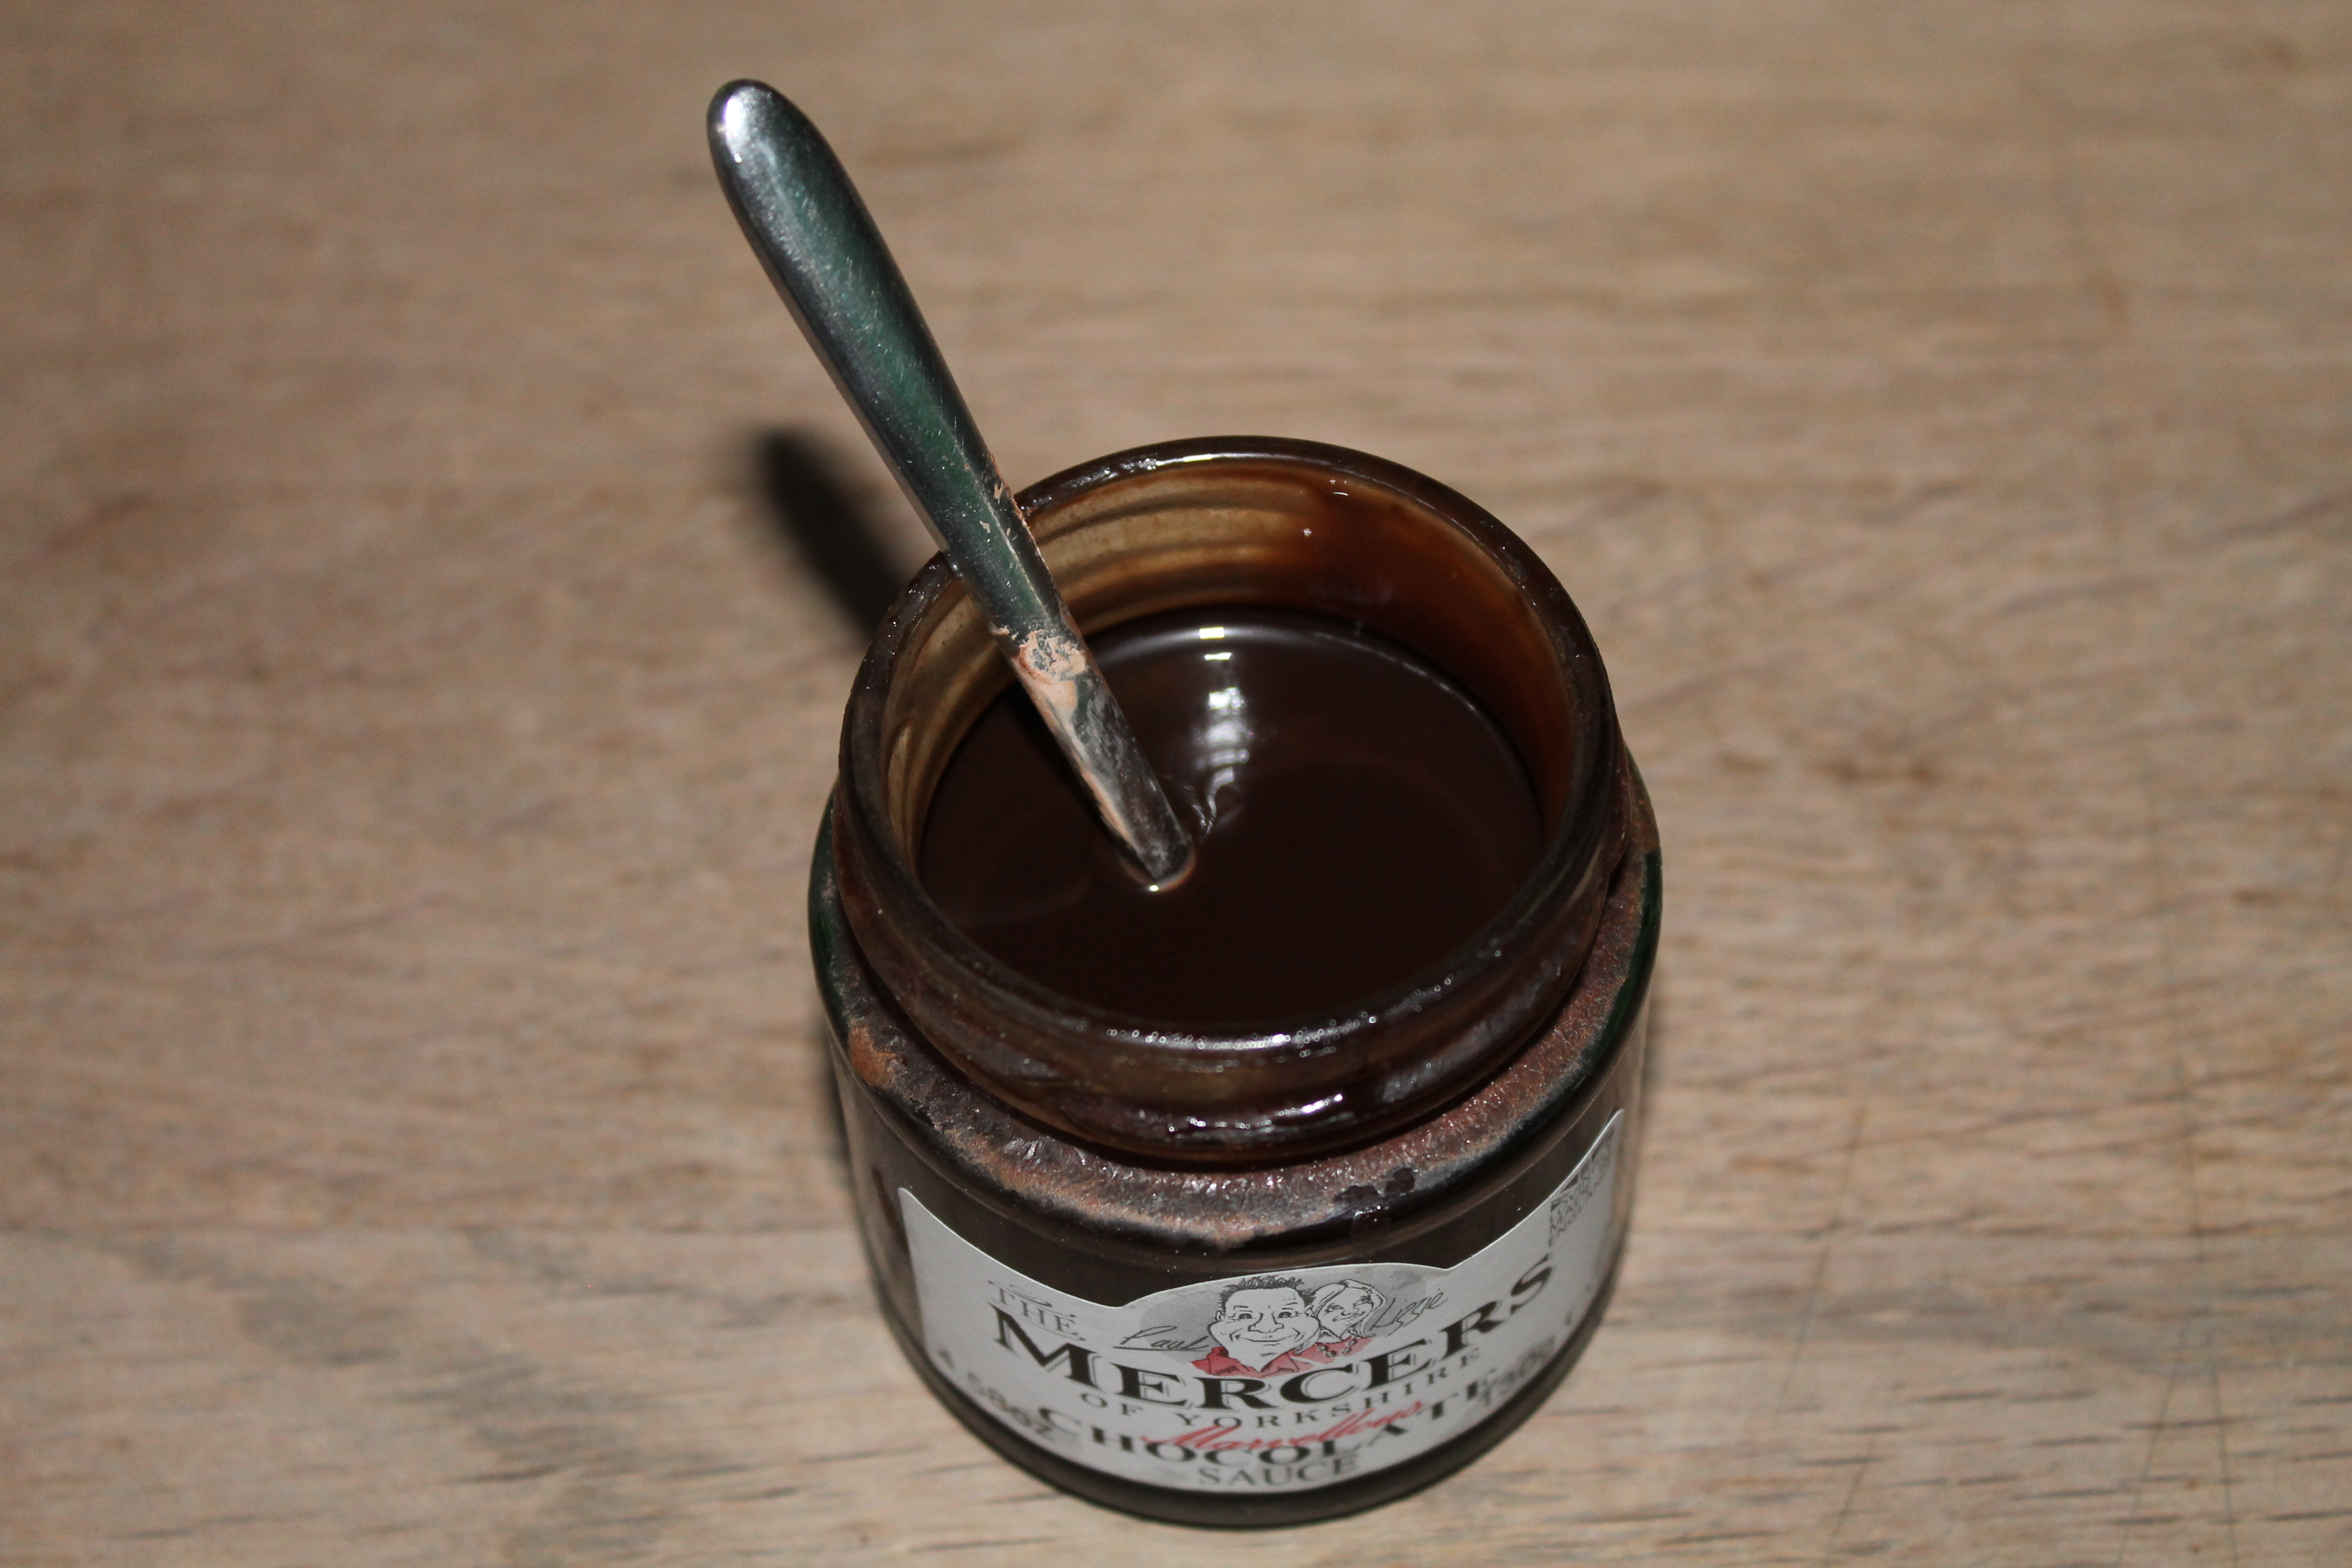 THE MERCERS OF YORKSHIRE - Chocolate sauce (texture)